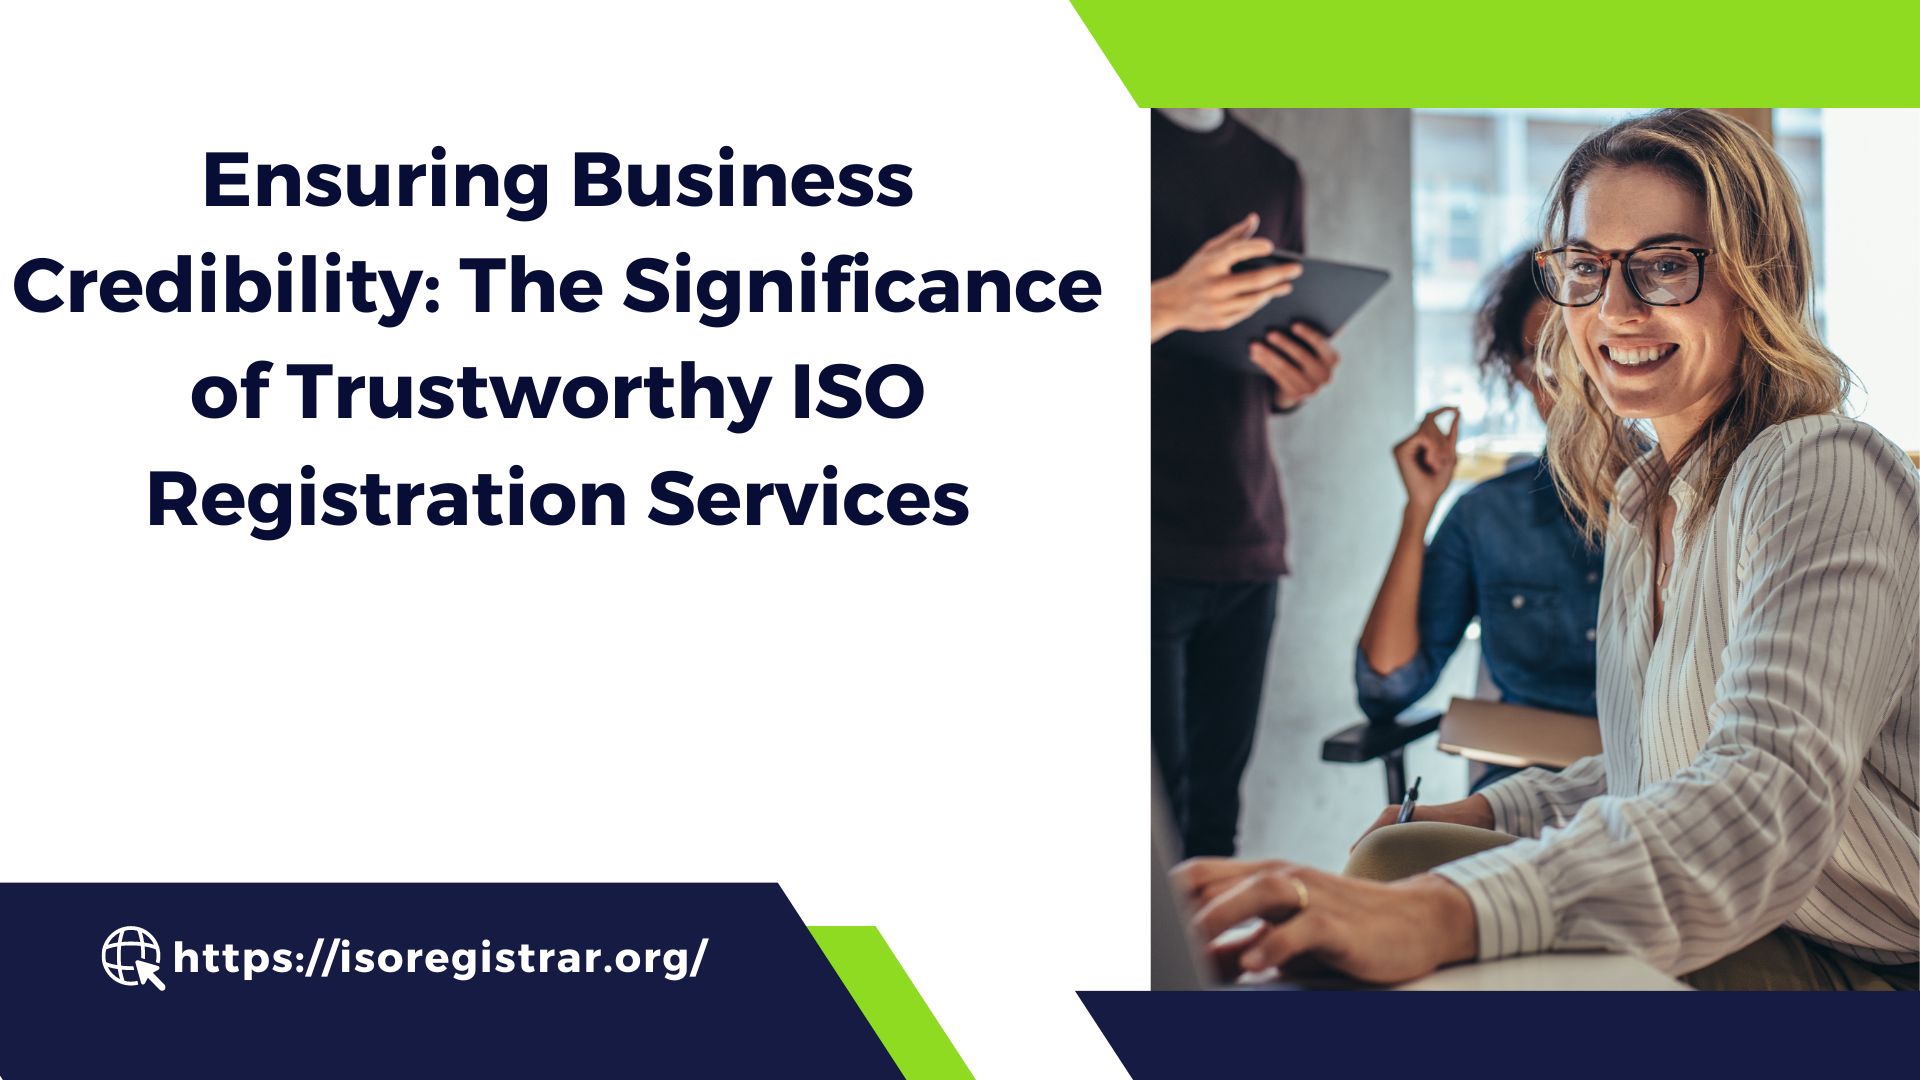 Ensuring Business Credibility: The Significance of Trustworthy ISO Registration Services